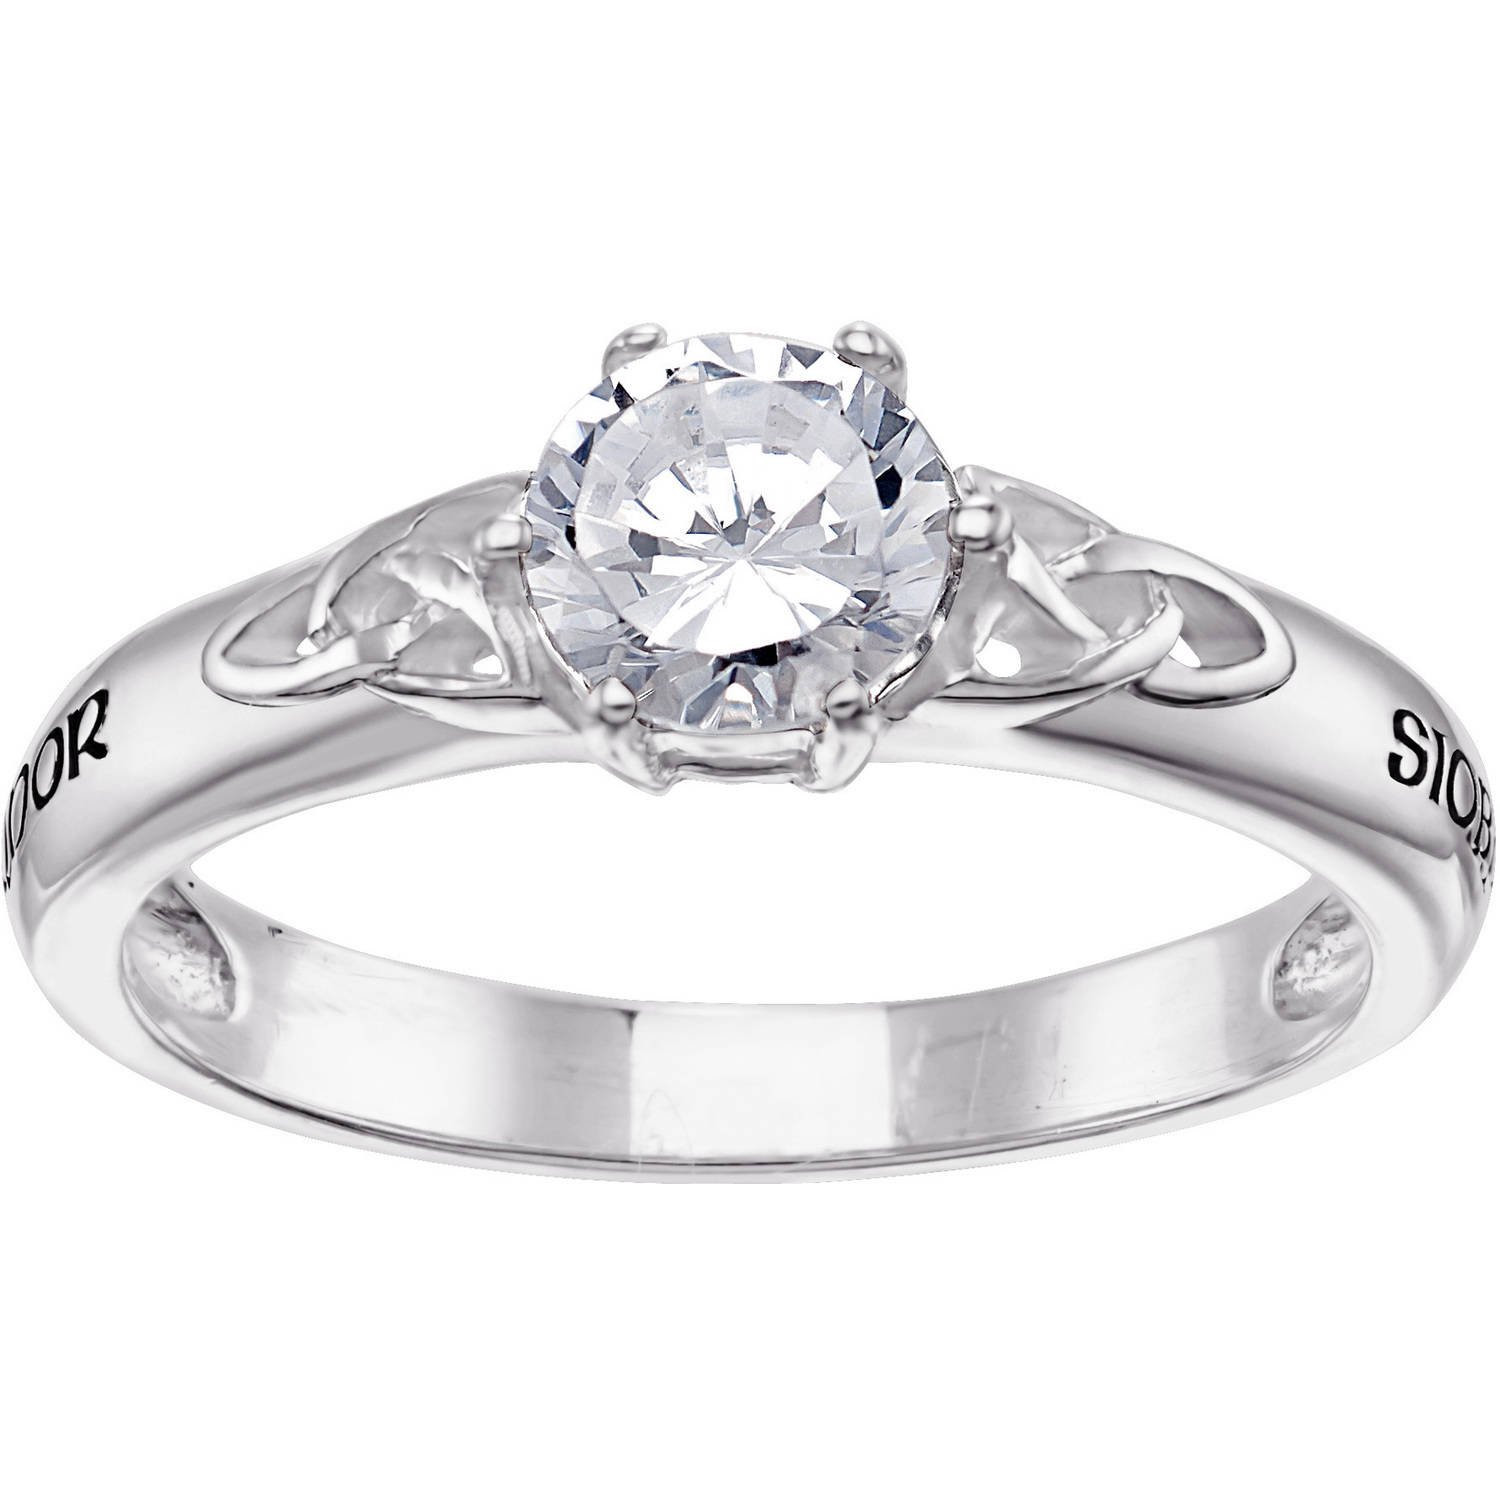 Walmart His And Hers Wedding Rings
 His and Hers 3 Pieces Sterling Silver and CZ Engagement